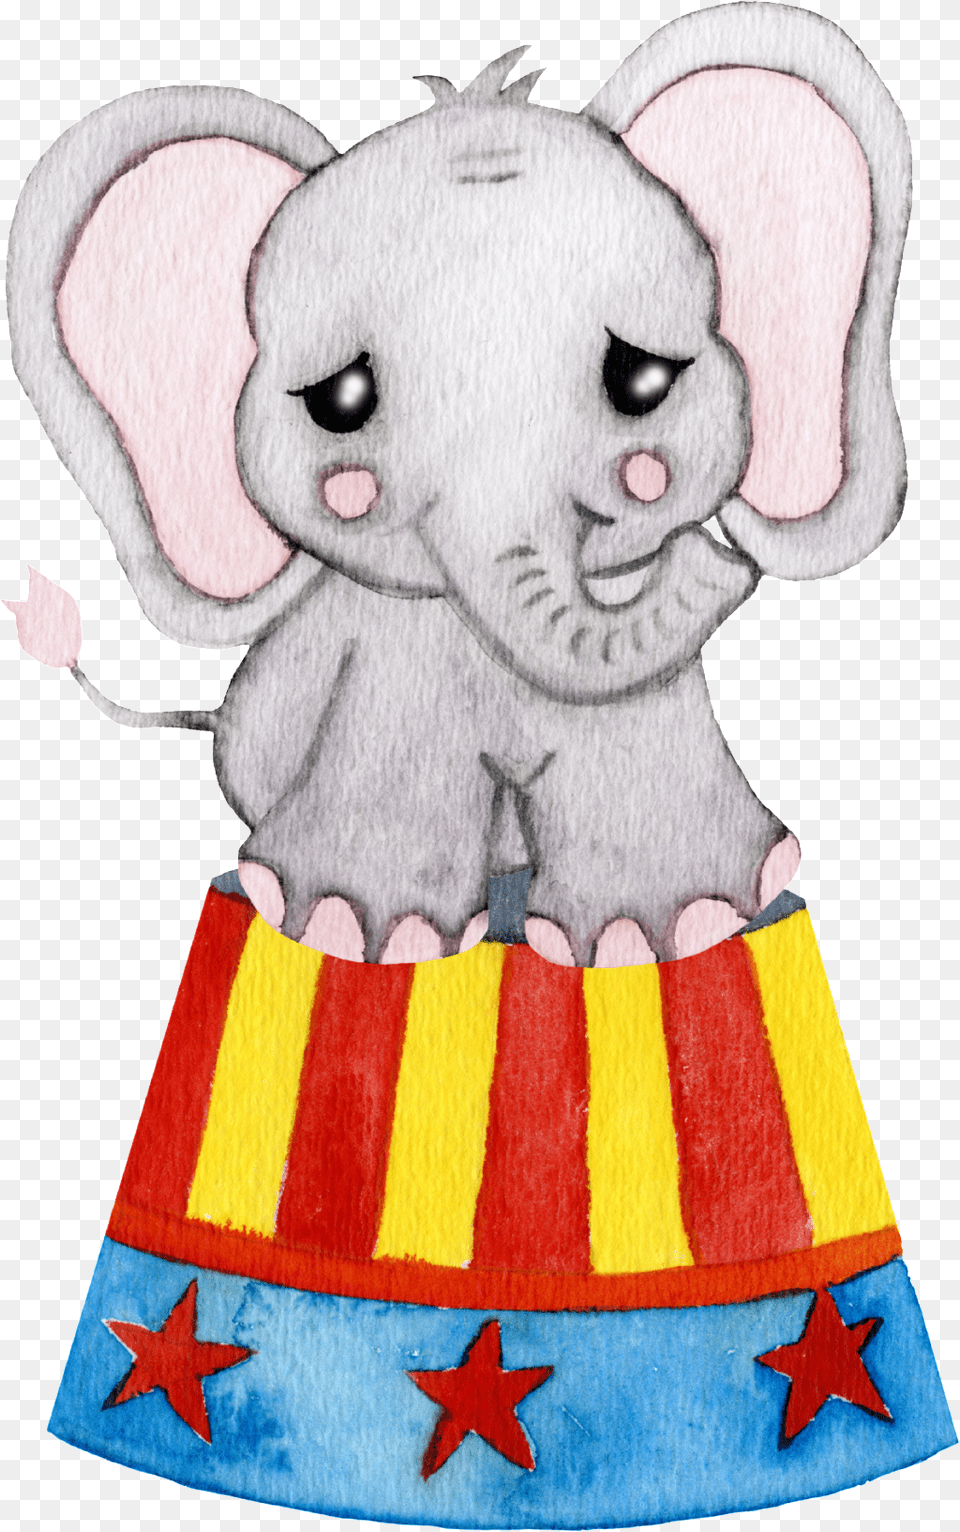 Hand Painted Baby Elephant Portable Network Graphics, Clothing, Hat, Birthday Cake, Cake Free Transparent Png